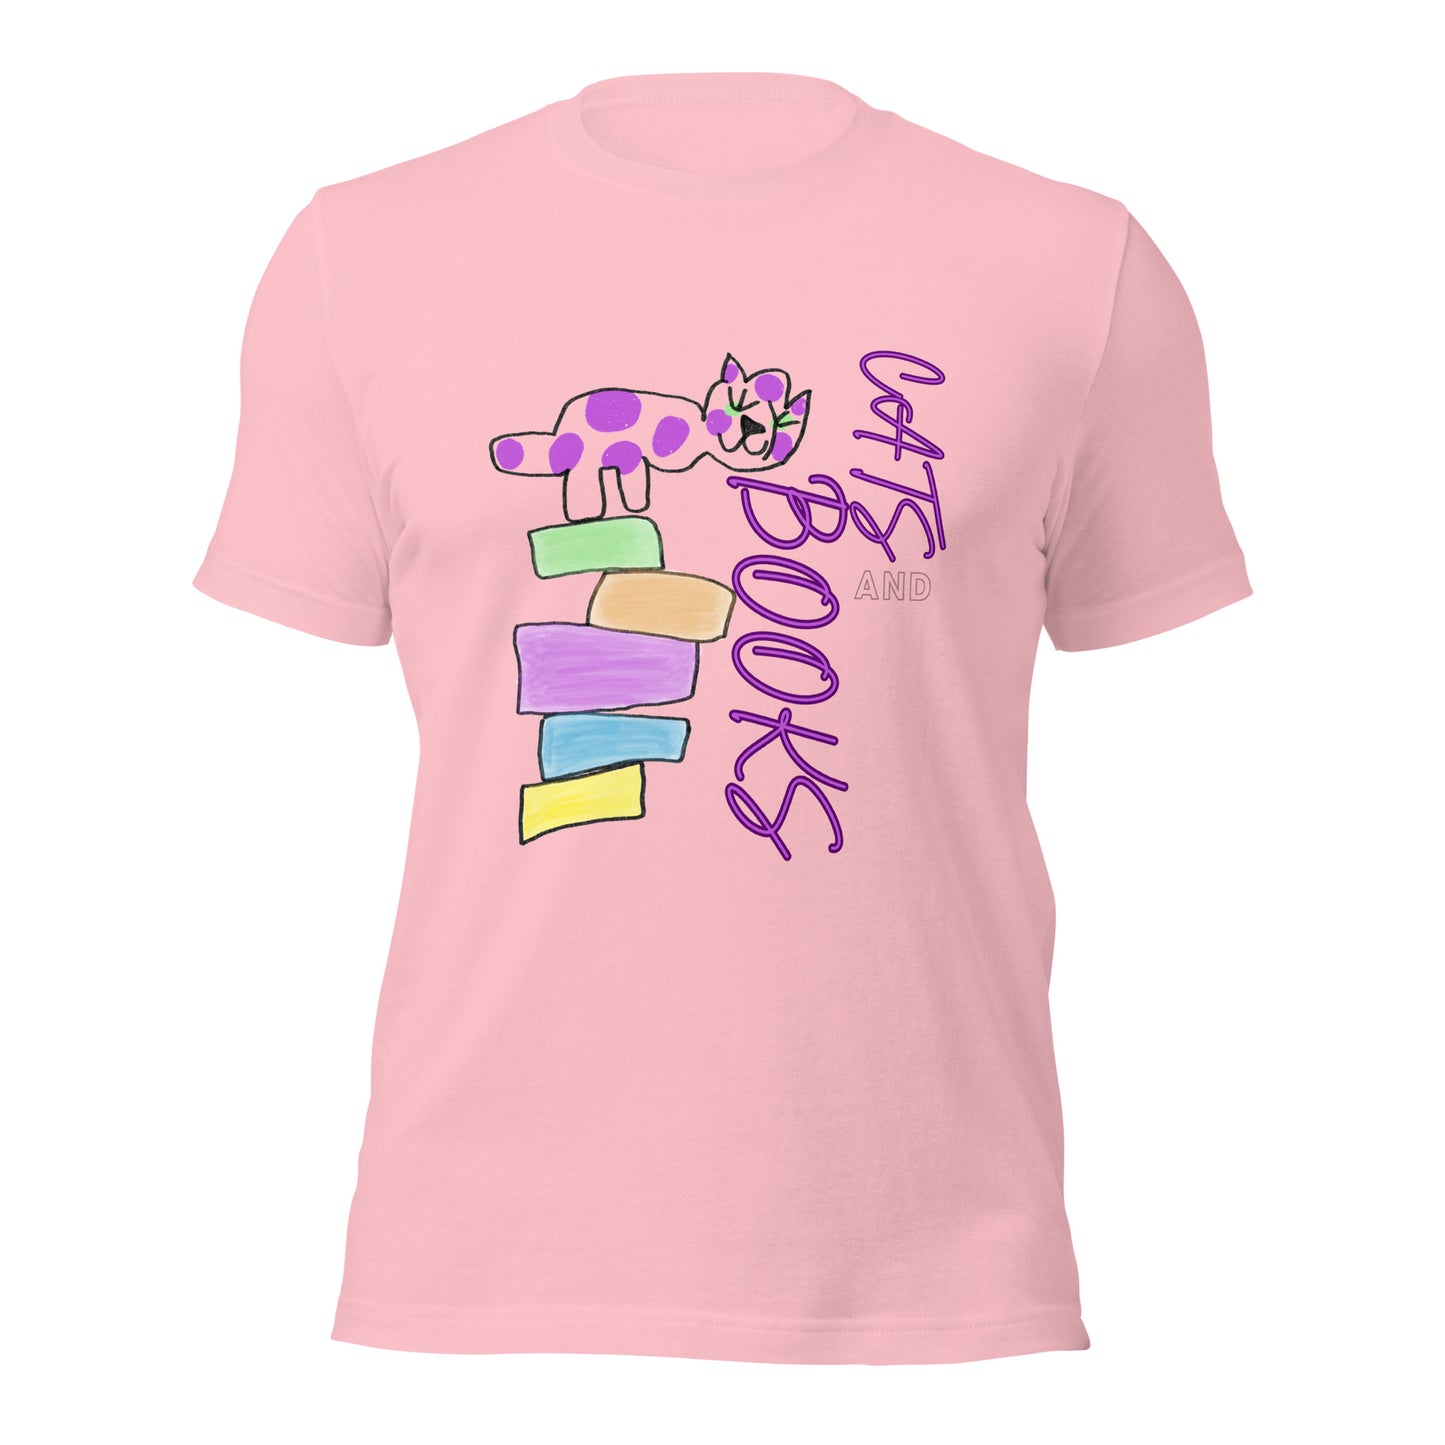 Cats and Books Shirt